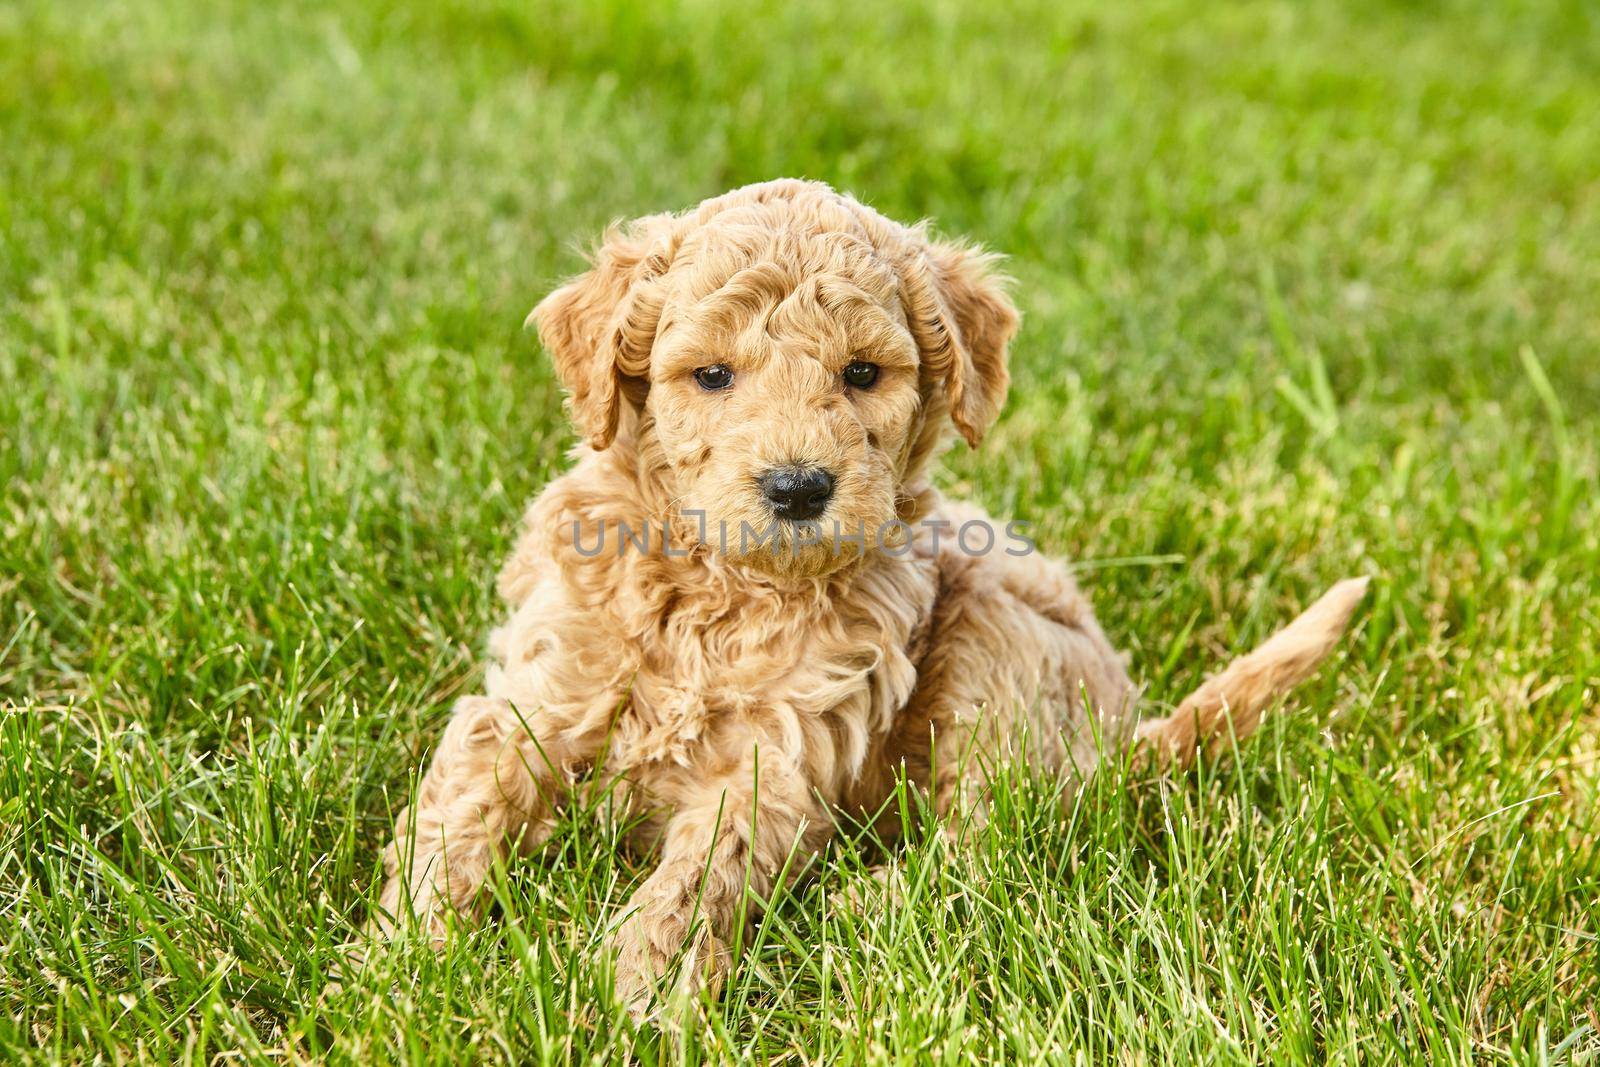 Image of Goldendoodle puppy cute in green lawn